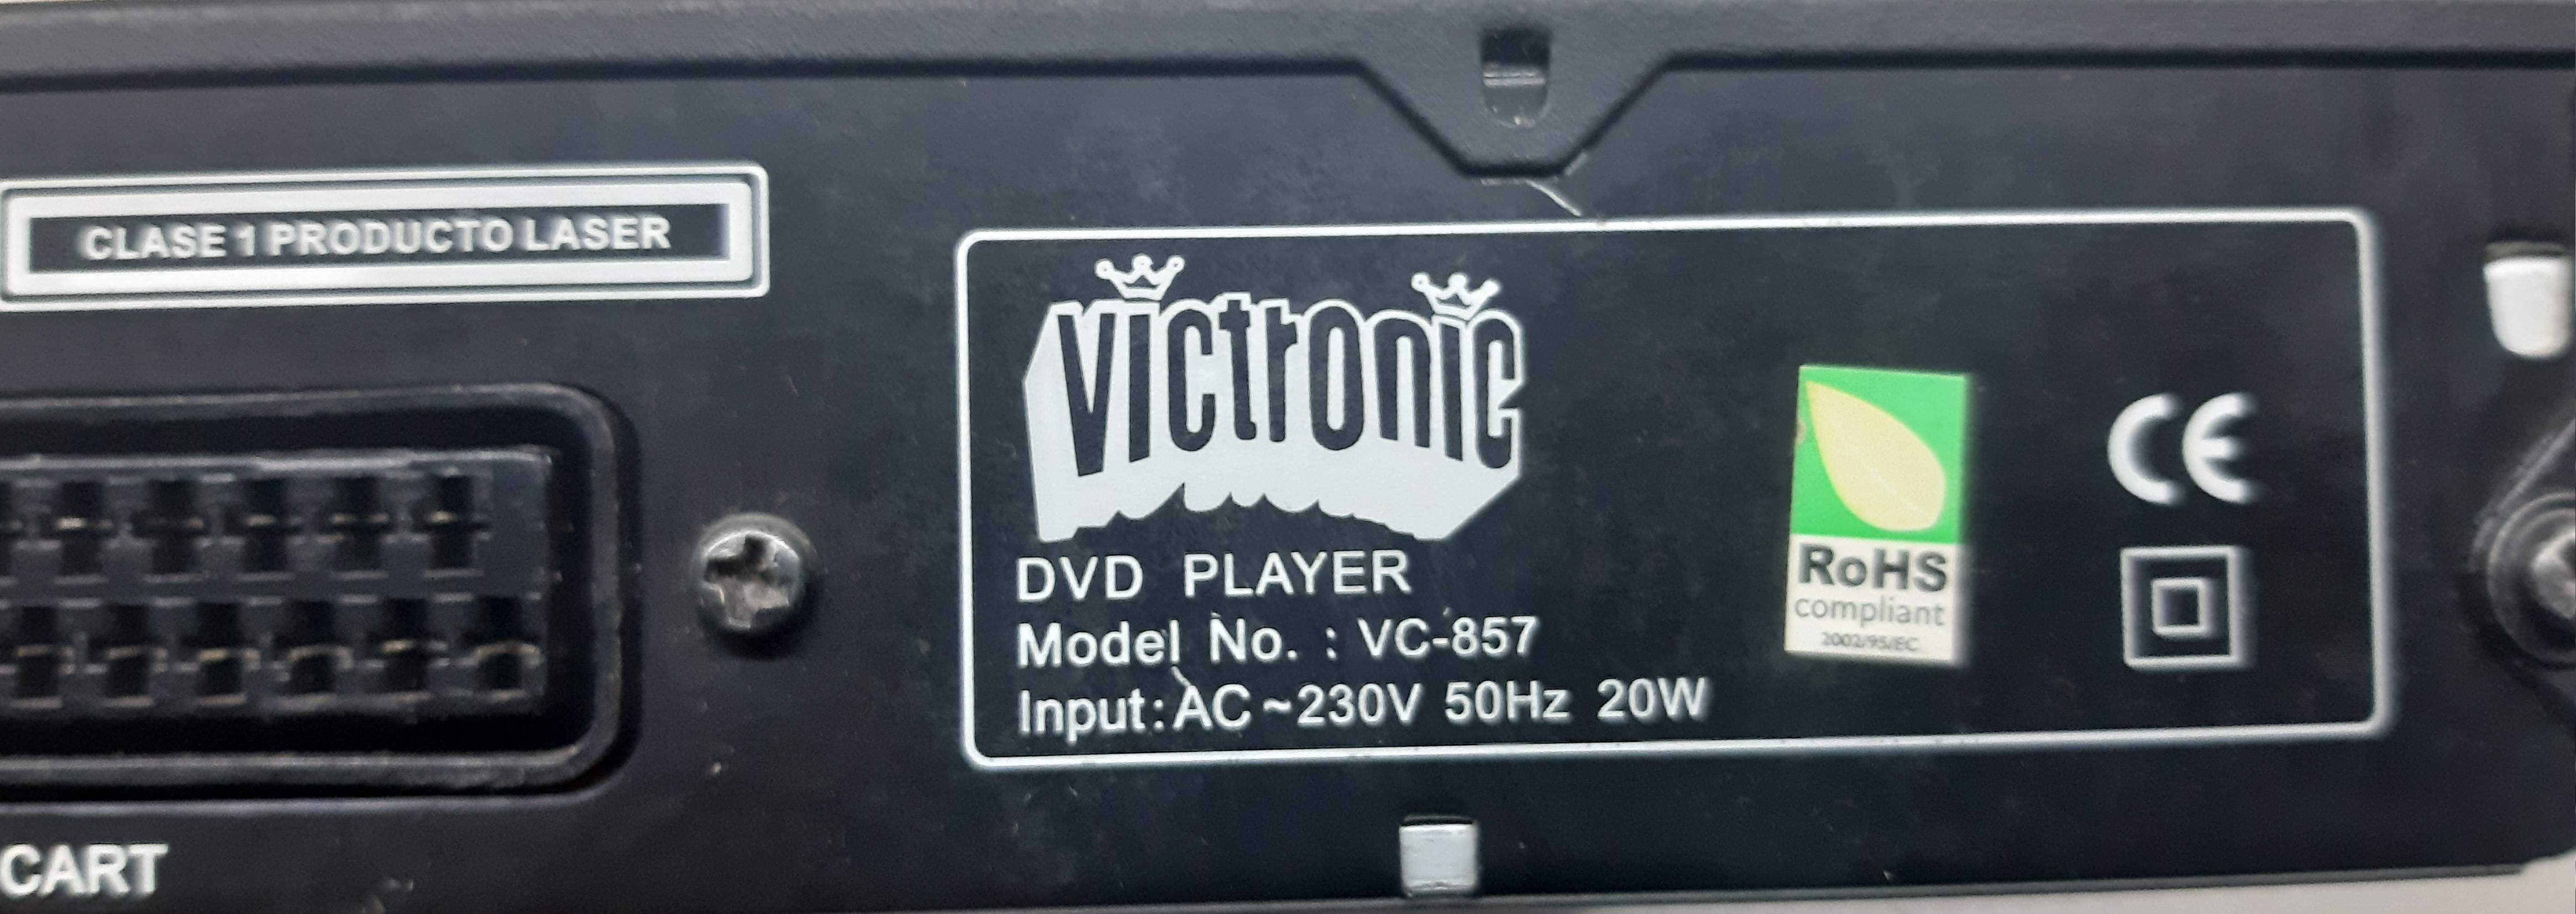 DVD Player Victronic VC-857